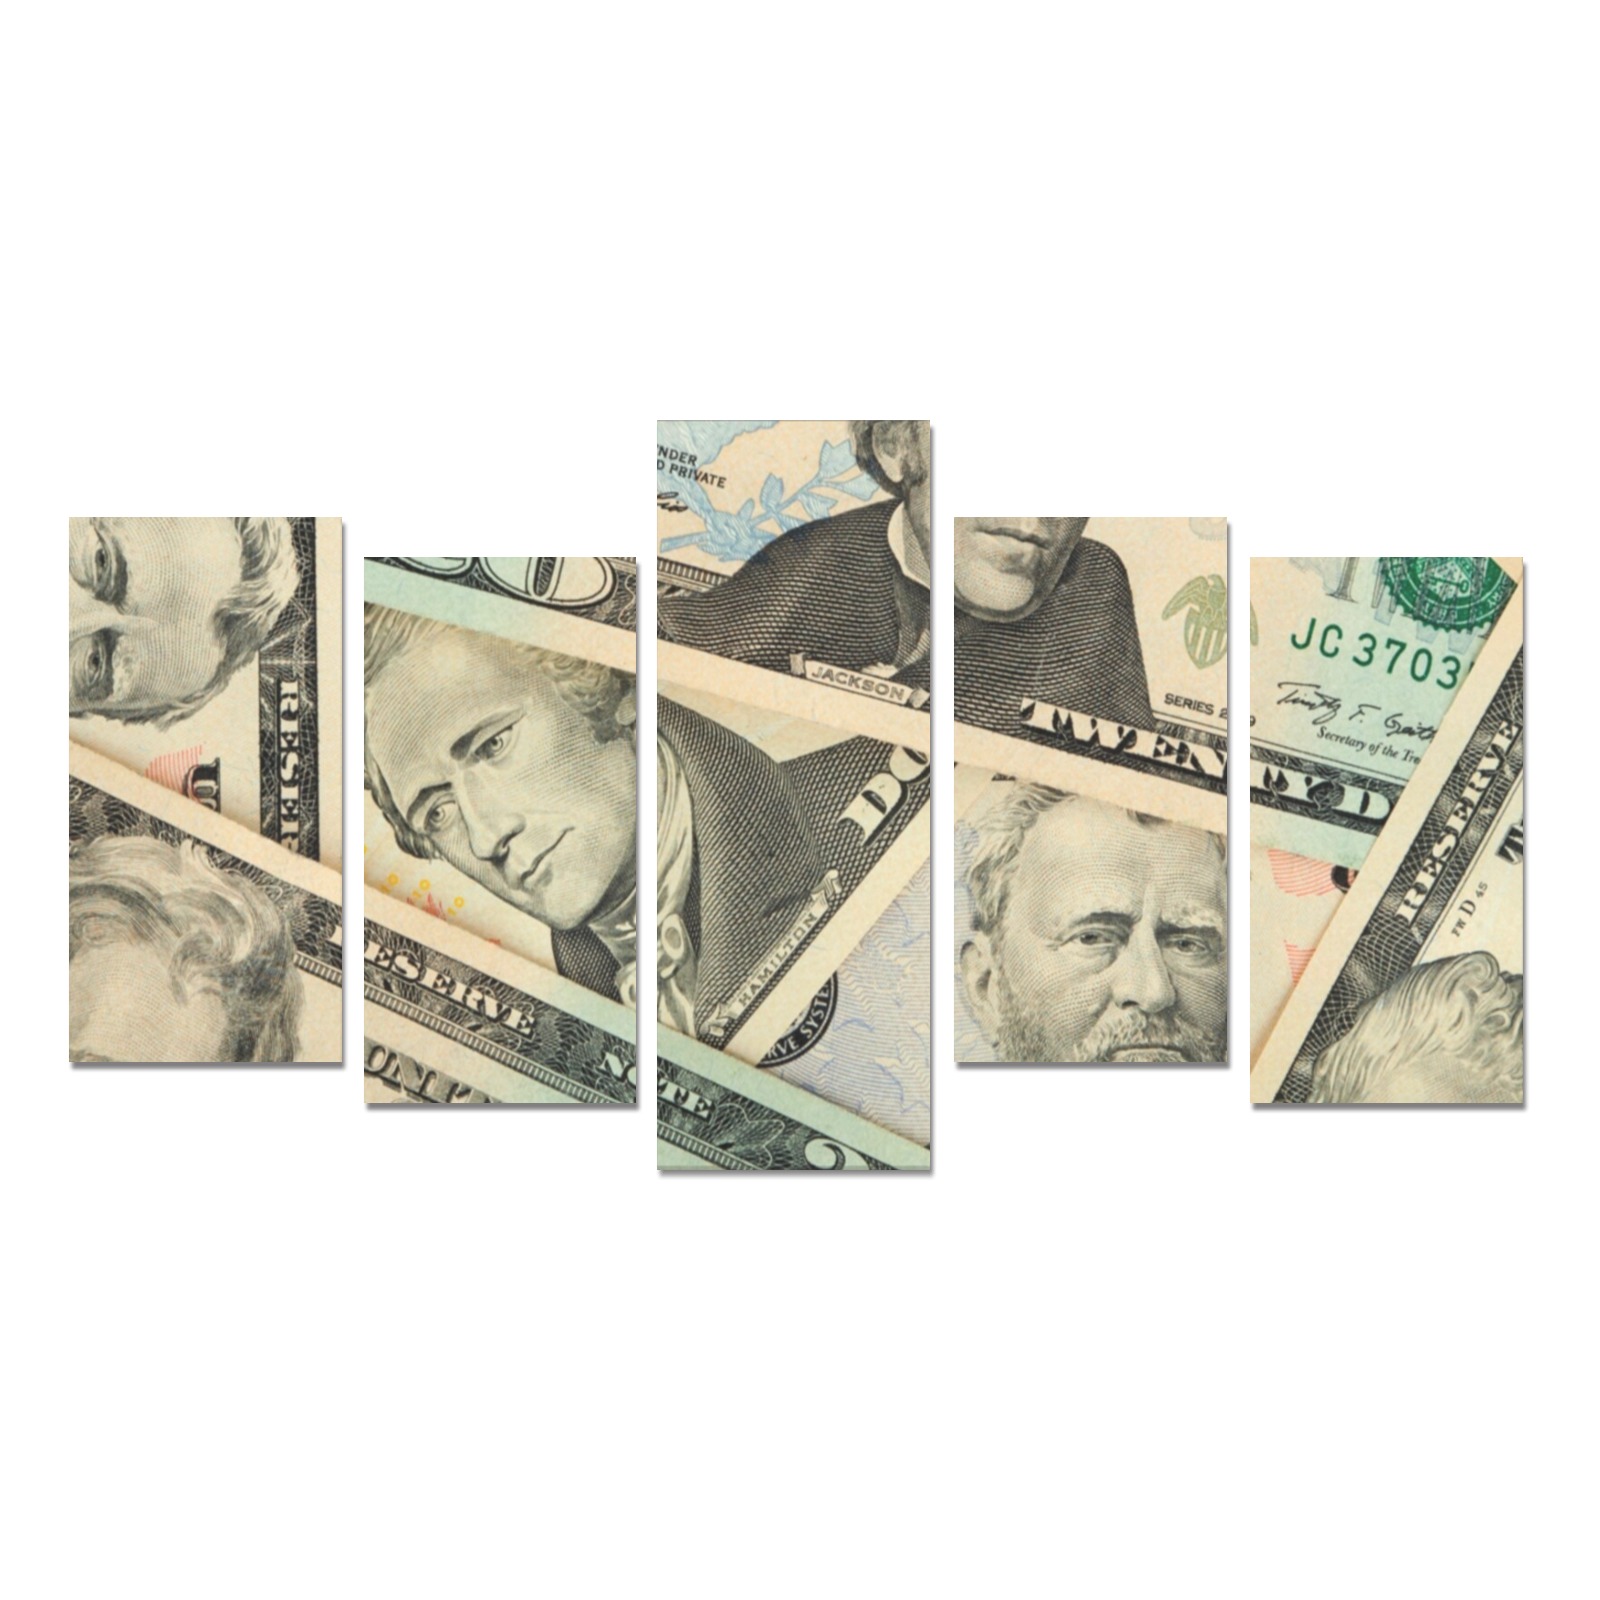 US PAPER CURRENCY Canvas Print Sets E (No Frame)